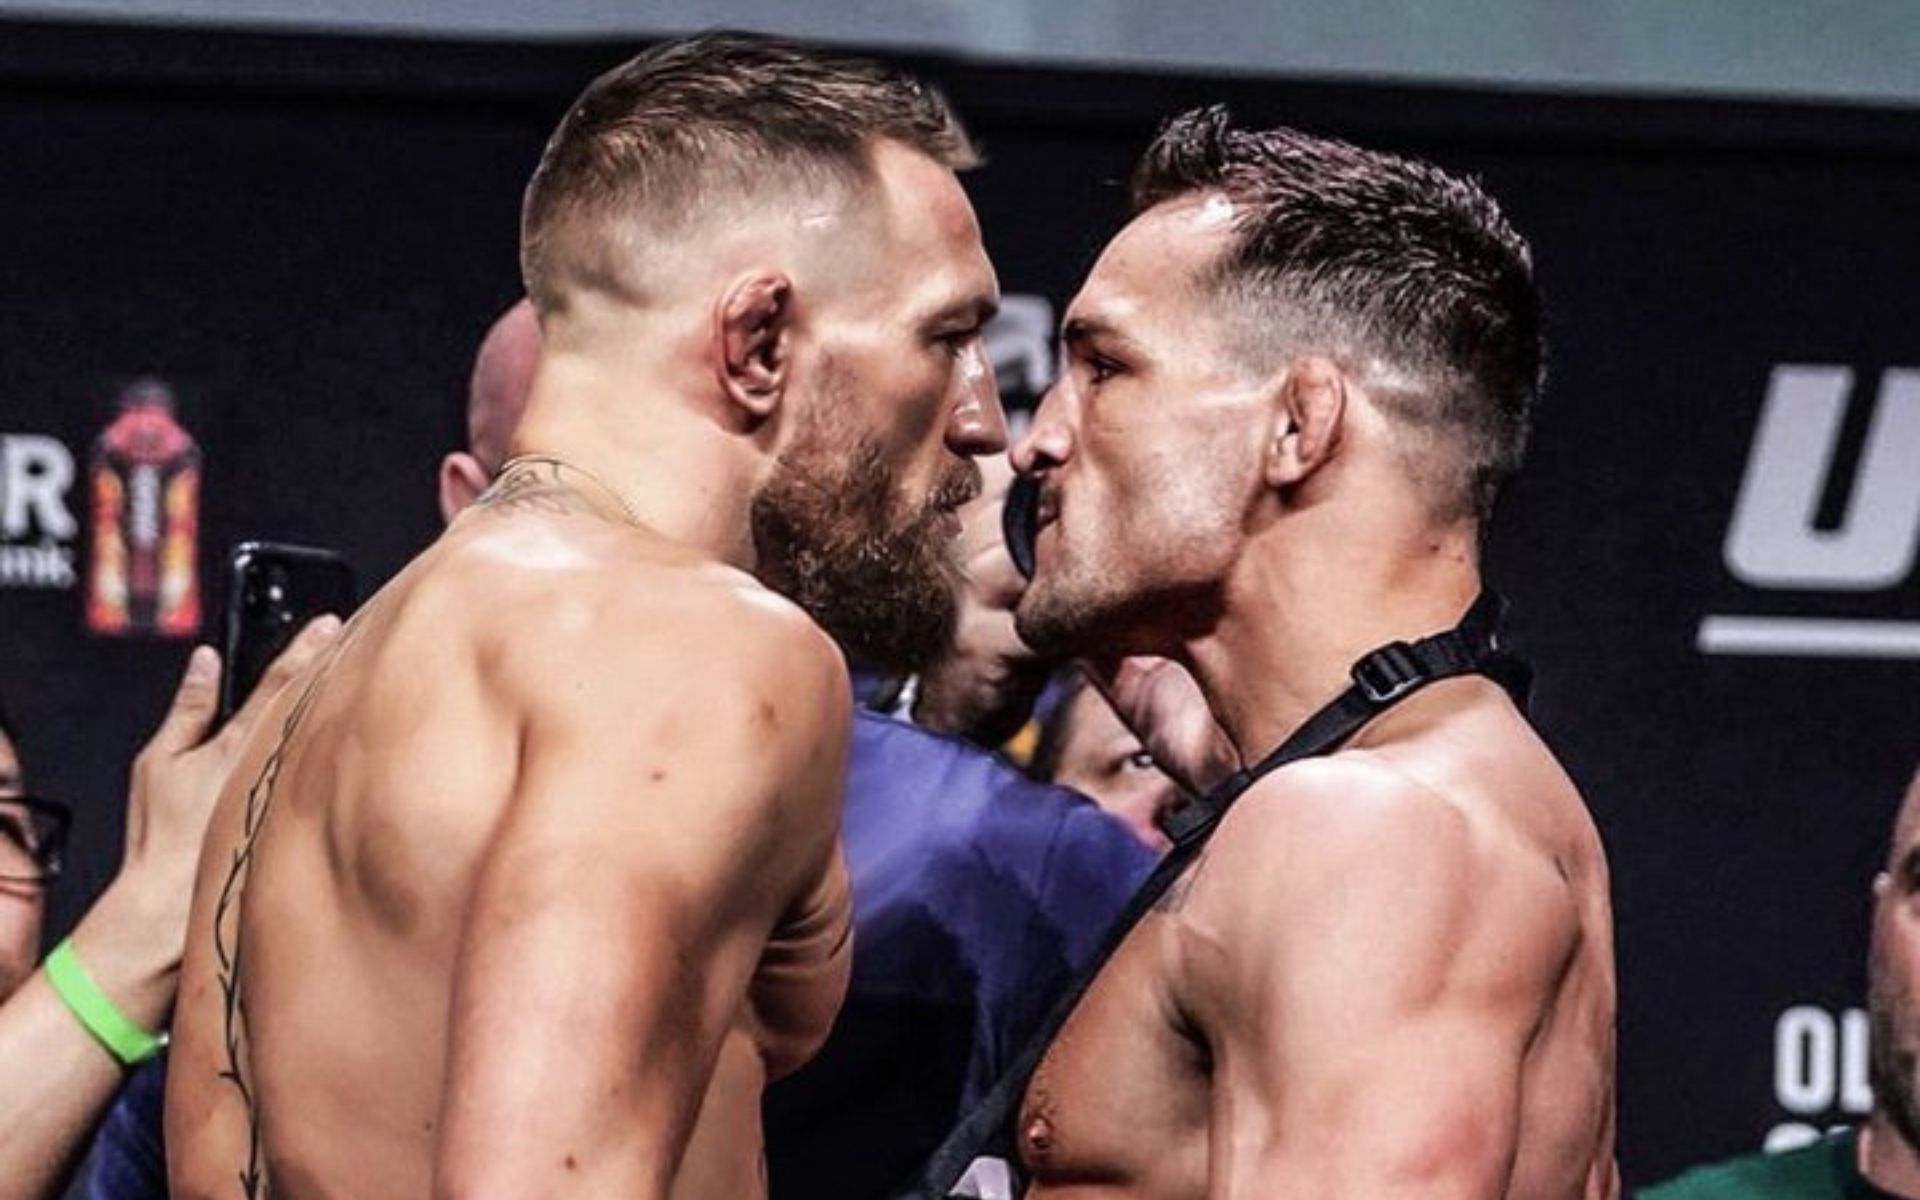 Conor McGregor (left) and Michael Chandler [Digitally altered image courtesy @MikeChandlerMMA on Twitter)